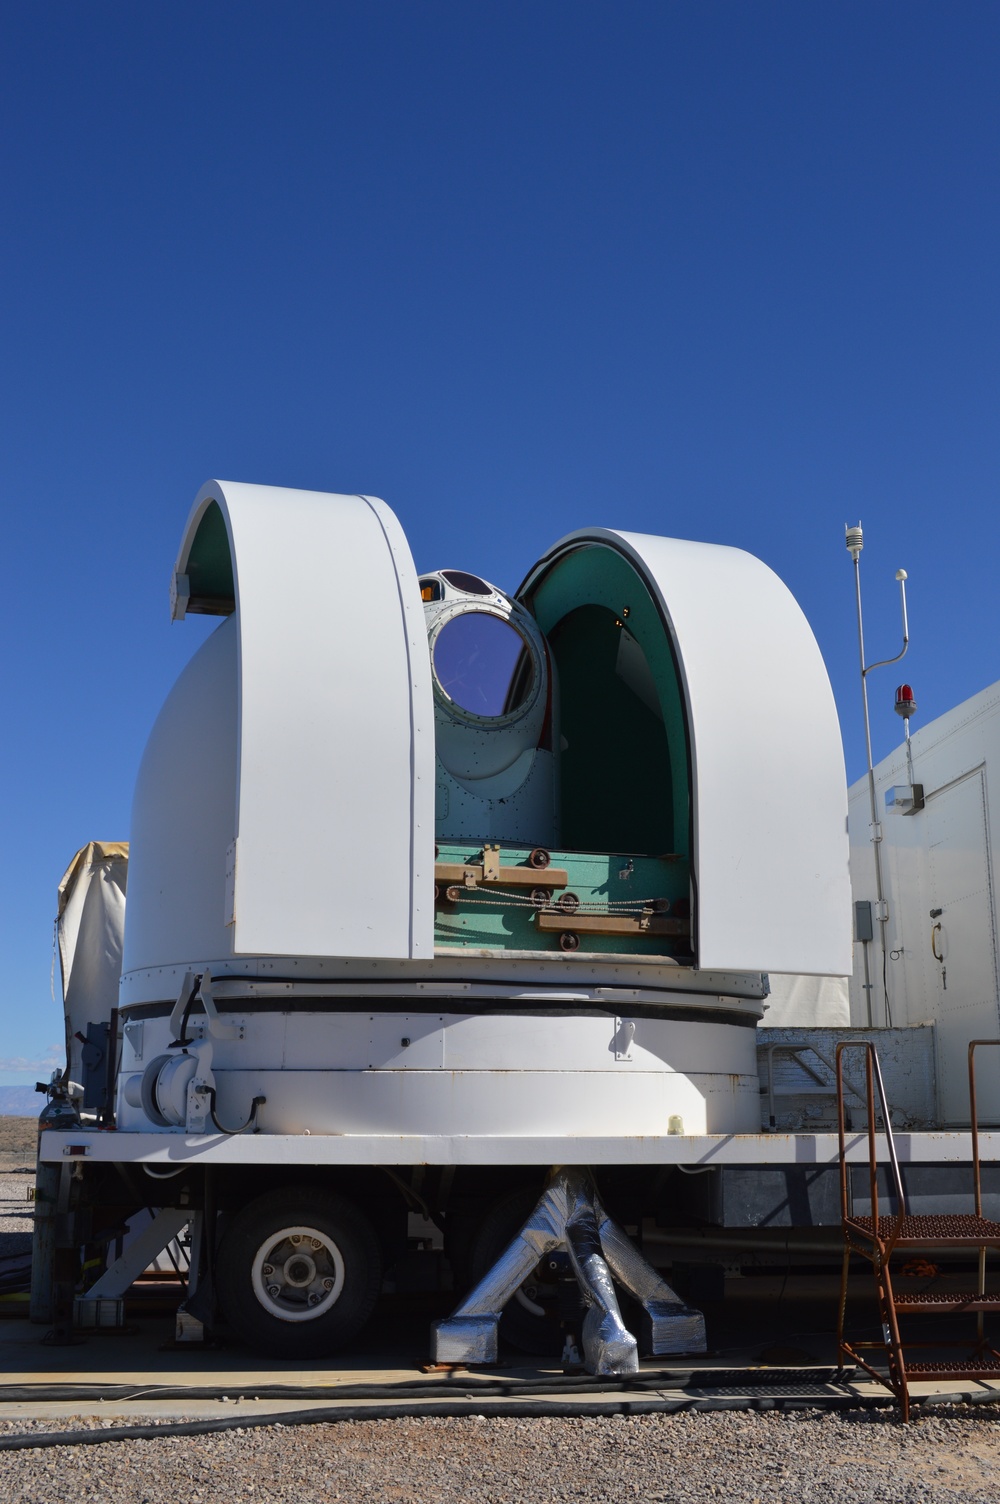 During the series of tests at the High Energy Laser System Test Facility at White Sands Missile Range, the Demonstrator Laser Weapon System (DLWS).